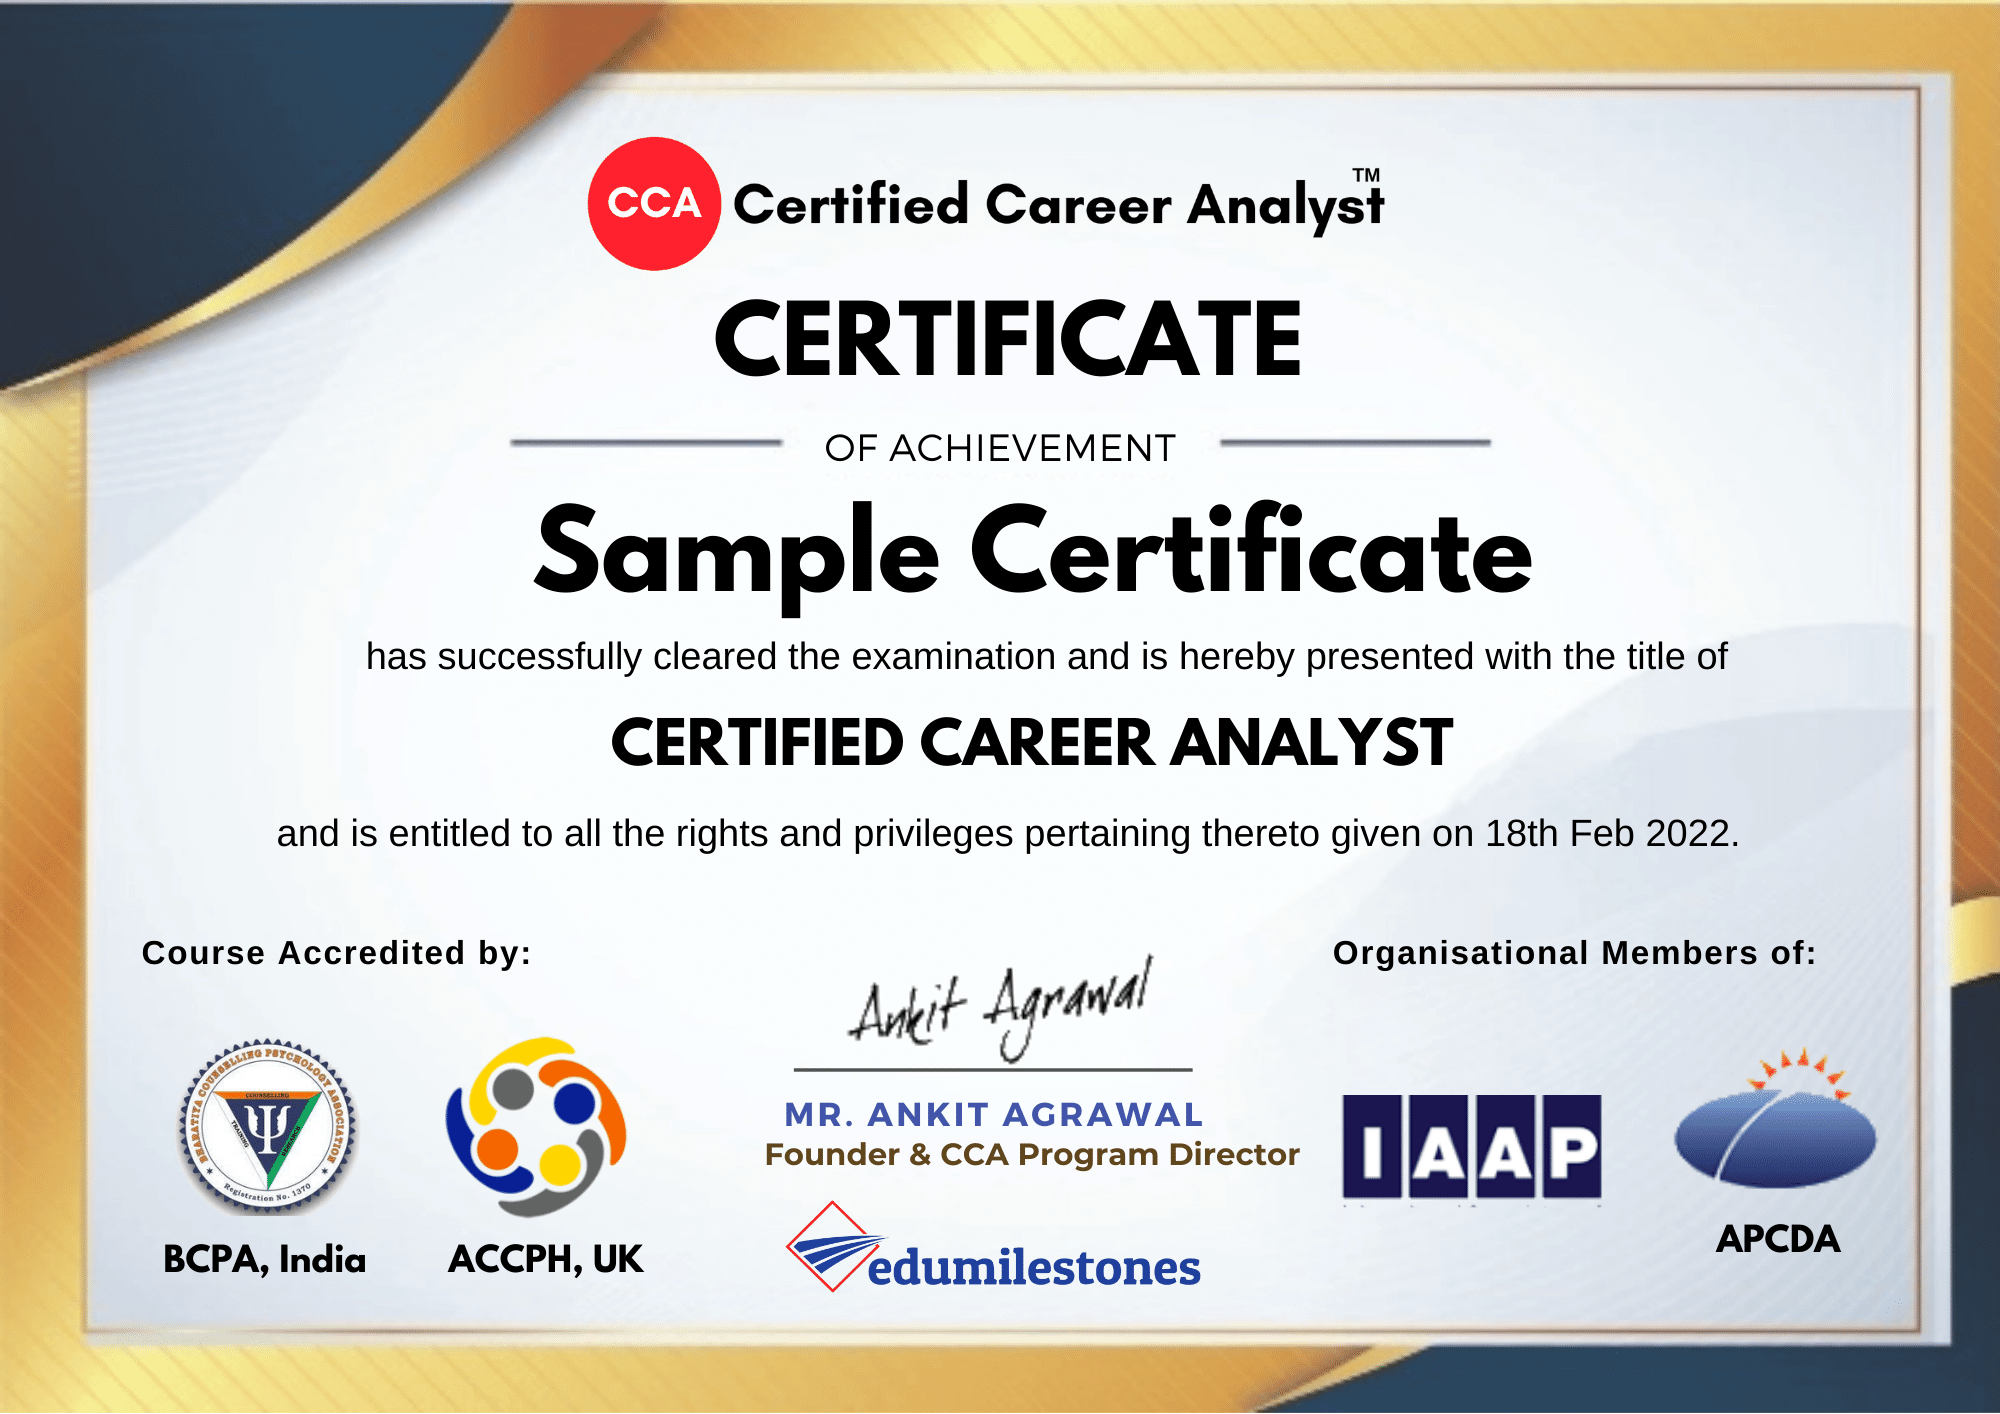 International career counsellor course Certified Career Analyst